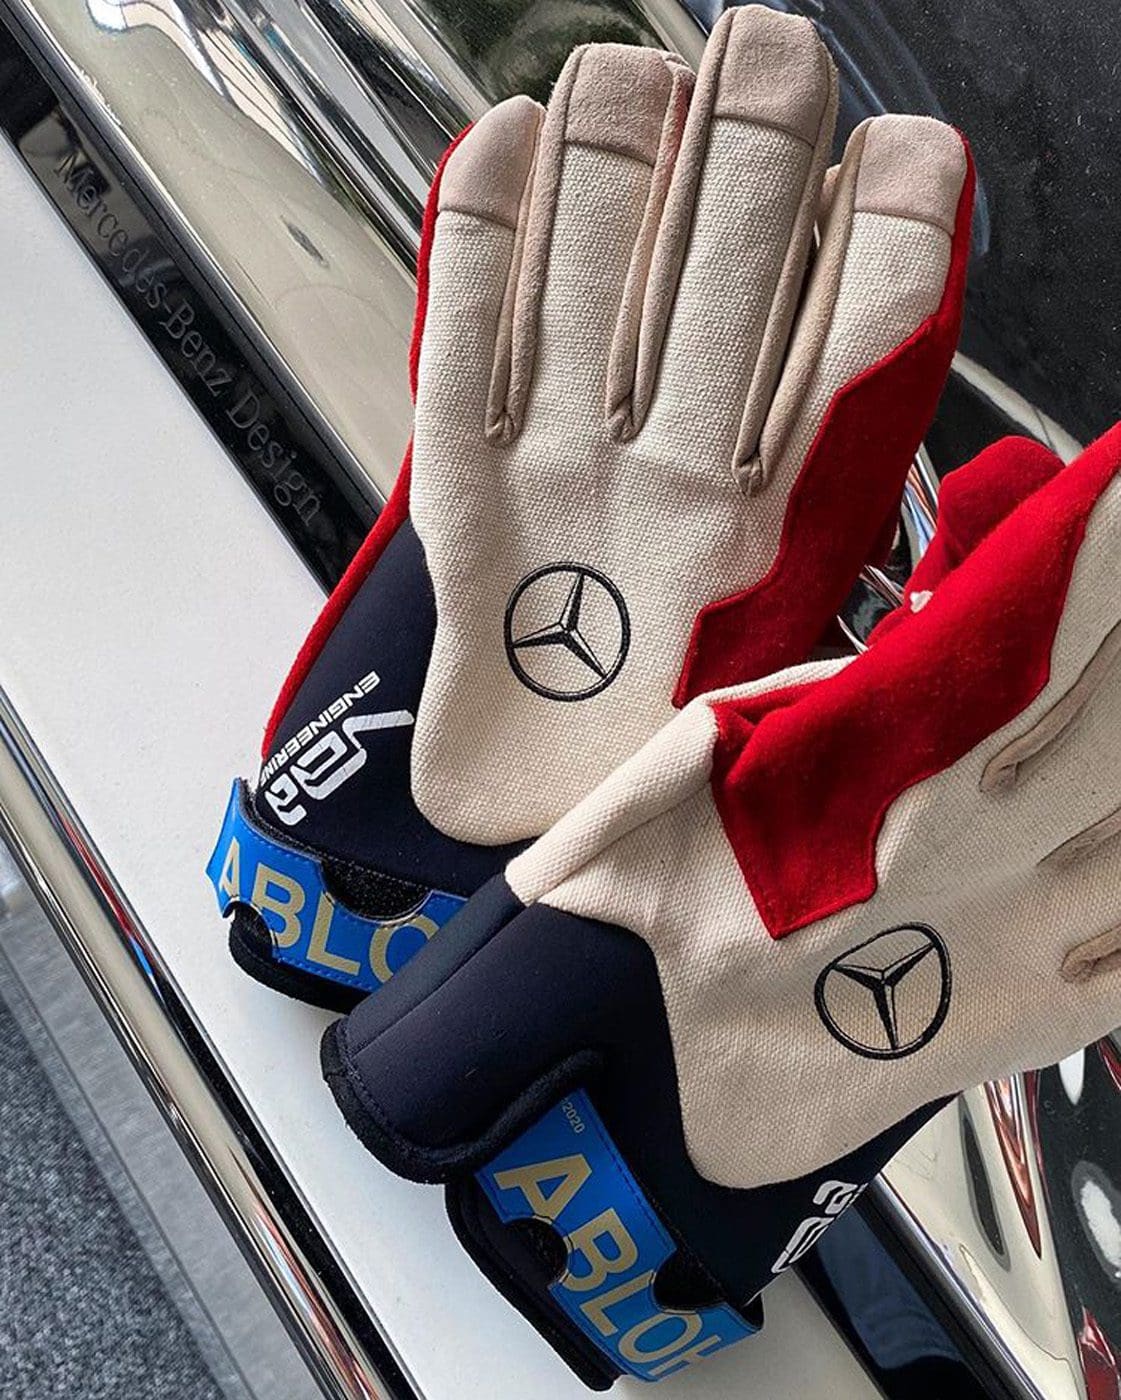 Virgil Abloh Gifts Gorden Wagener An Unreleased Pair of Mercedes-Benz  Driving Gloves